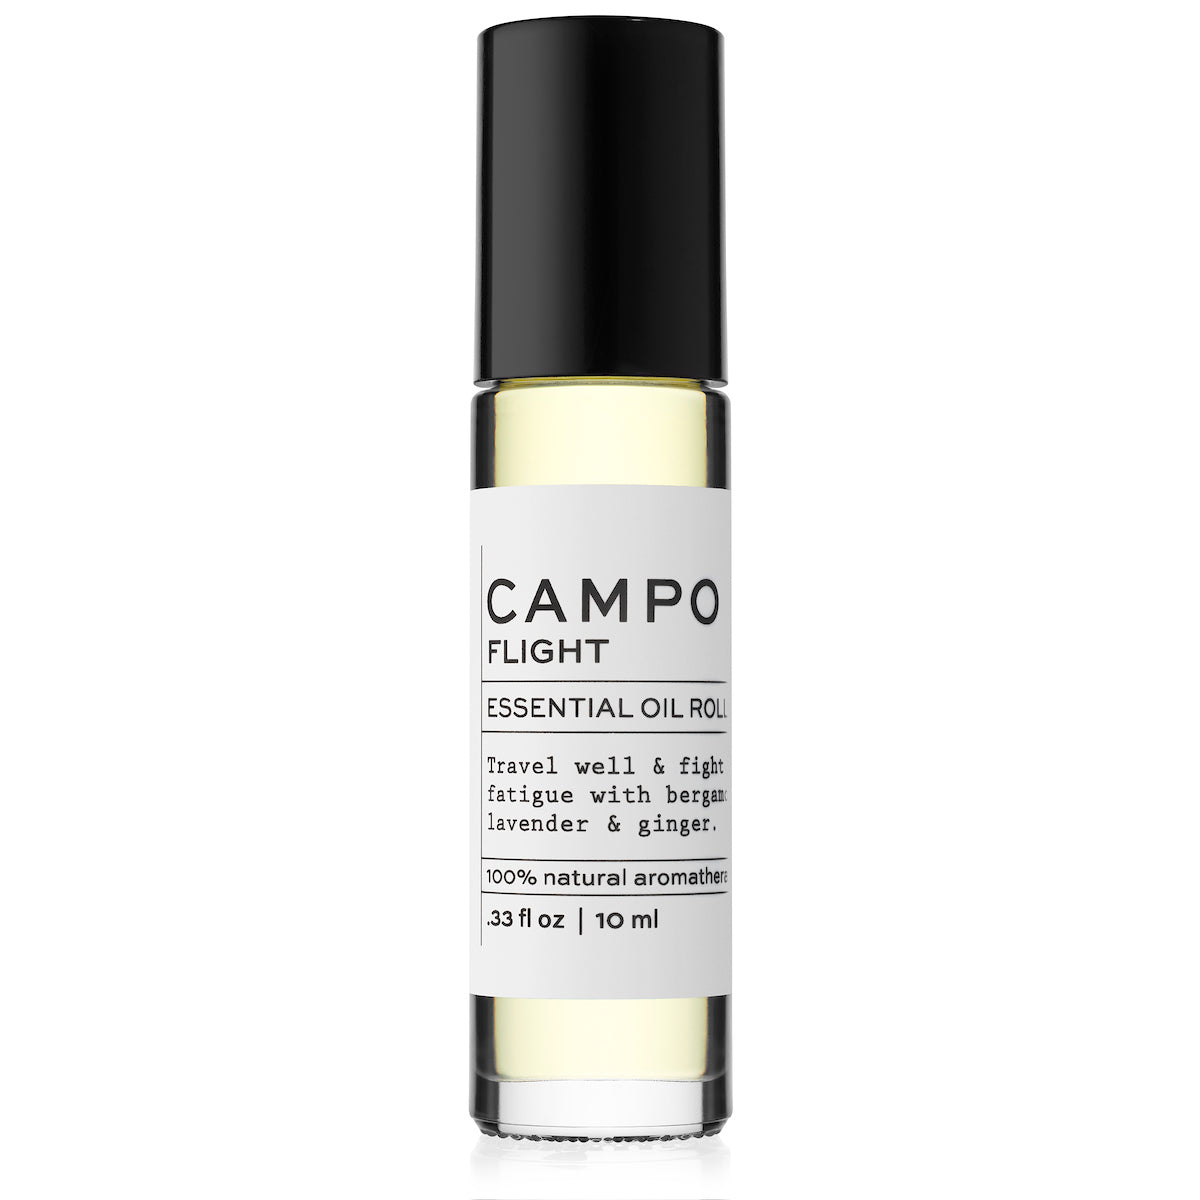 Campo Beauty Essential Oil FLIGHT Blend Roll-On that in 10 ml. Dispels feelings of stress during flight and restores a sense of vitality and alertness in any time zone. Feel grounded and connected to your mind and body with this 100% pure essential oil roll-on blend of Bergamot, Lavender, Peppermint &amp; Ginger. Pre-blended with 100% natural beauty carrier oils, so it’s jet-set and ready to roll.